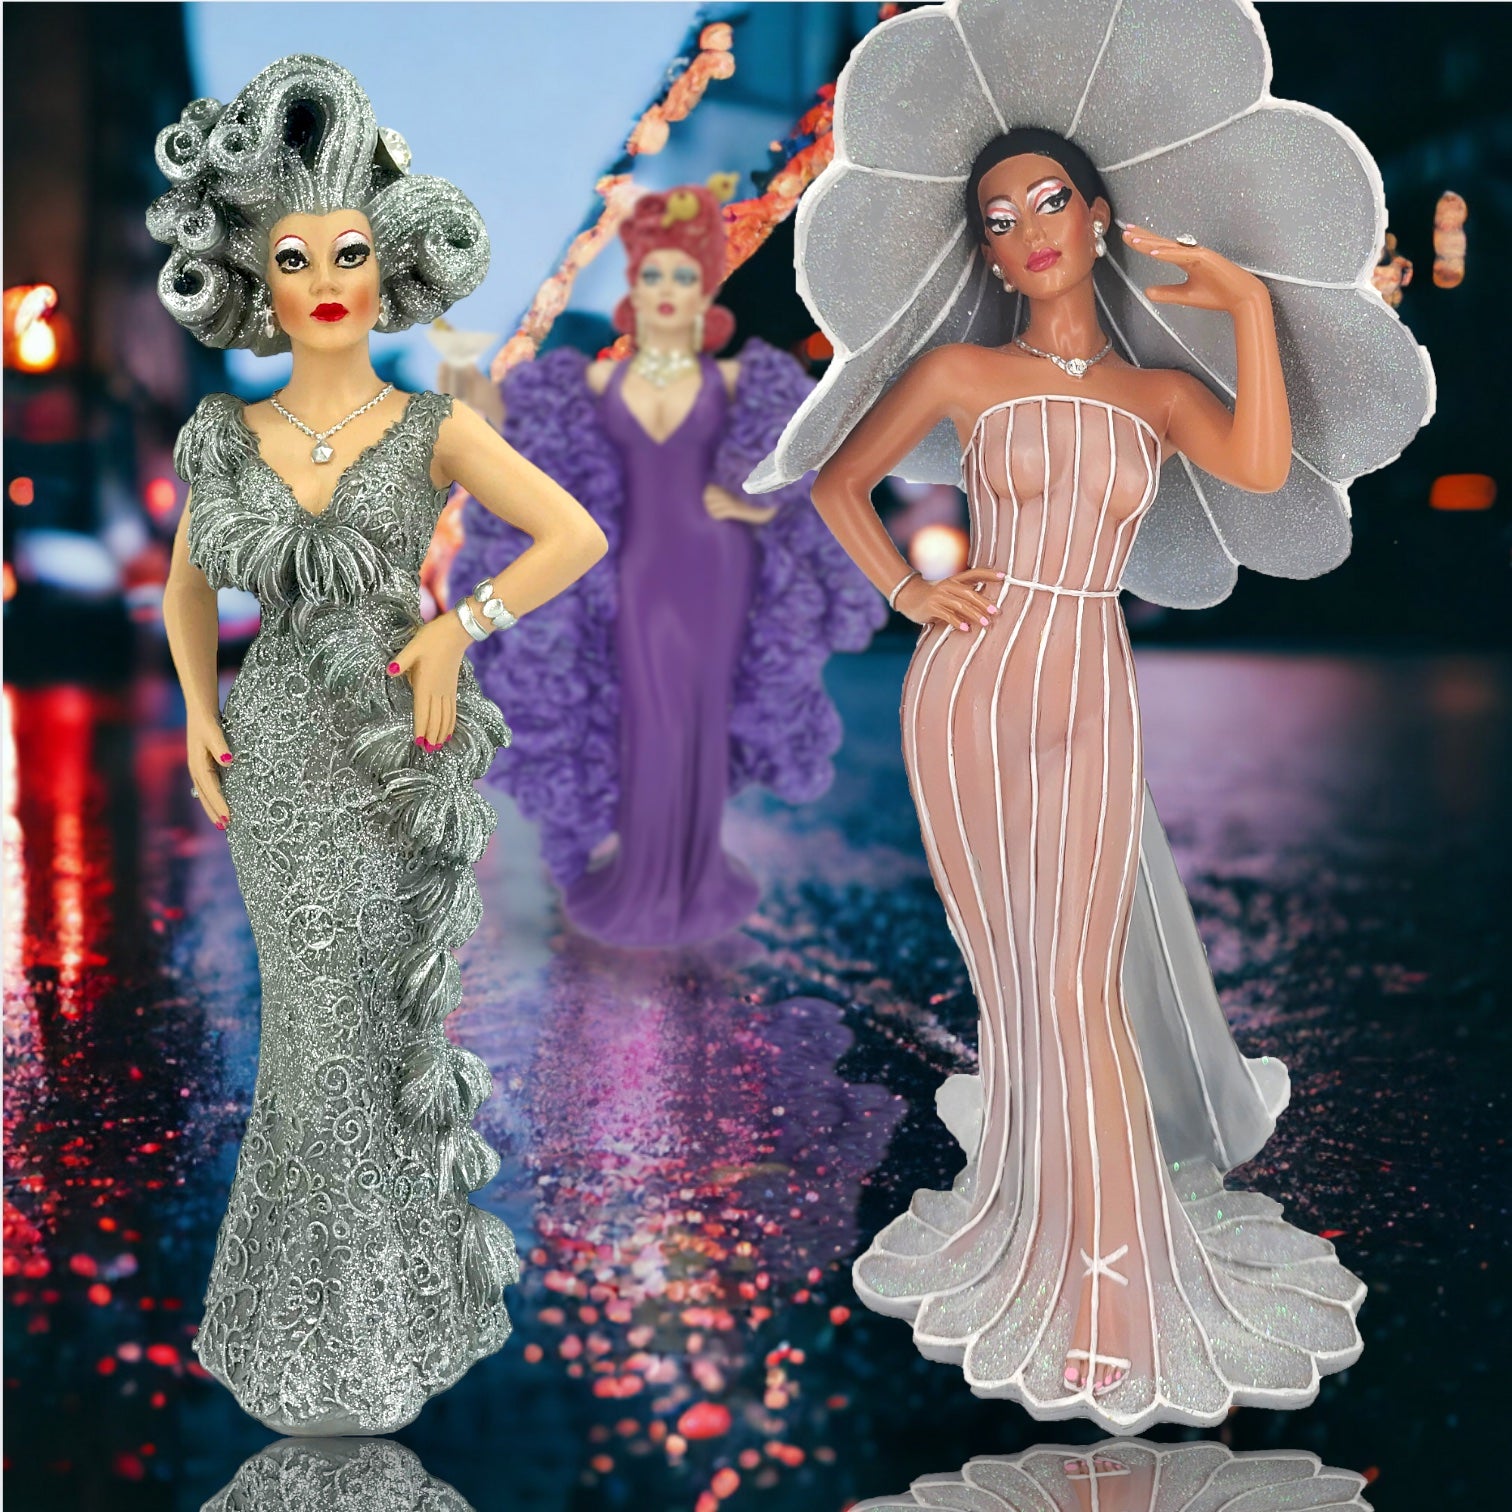 What a Drag Collectible Drag Queen Figures